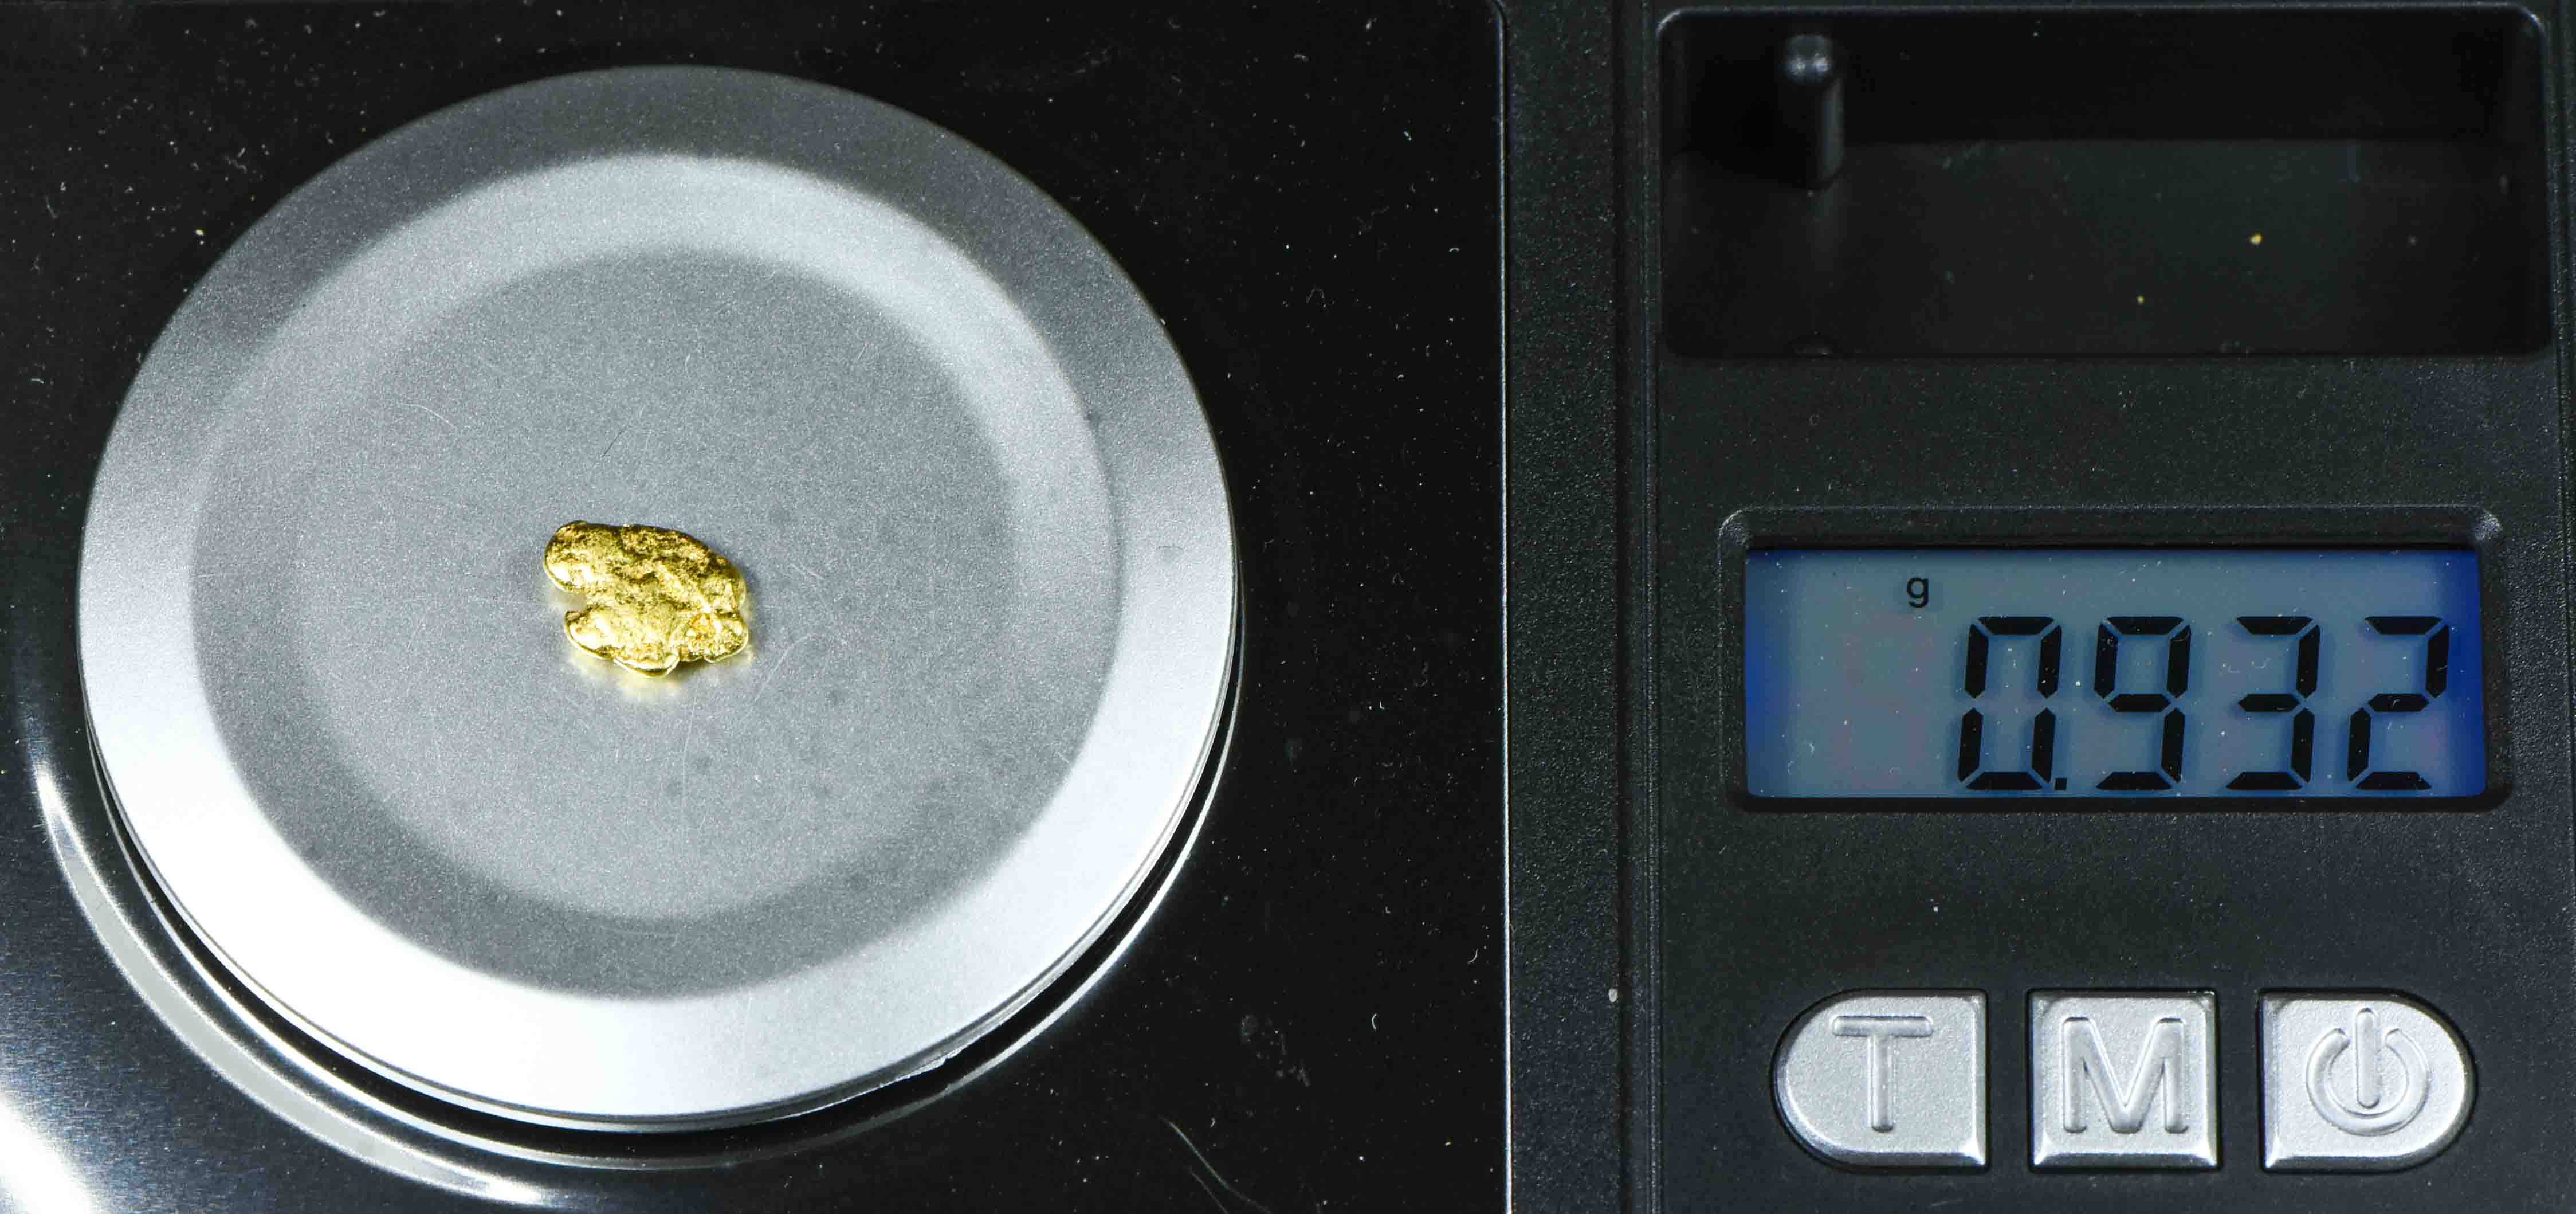 #11 California Gold Nugget .93 Grams Authentic Natural